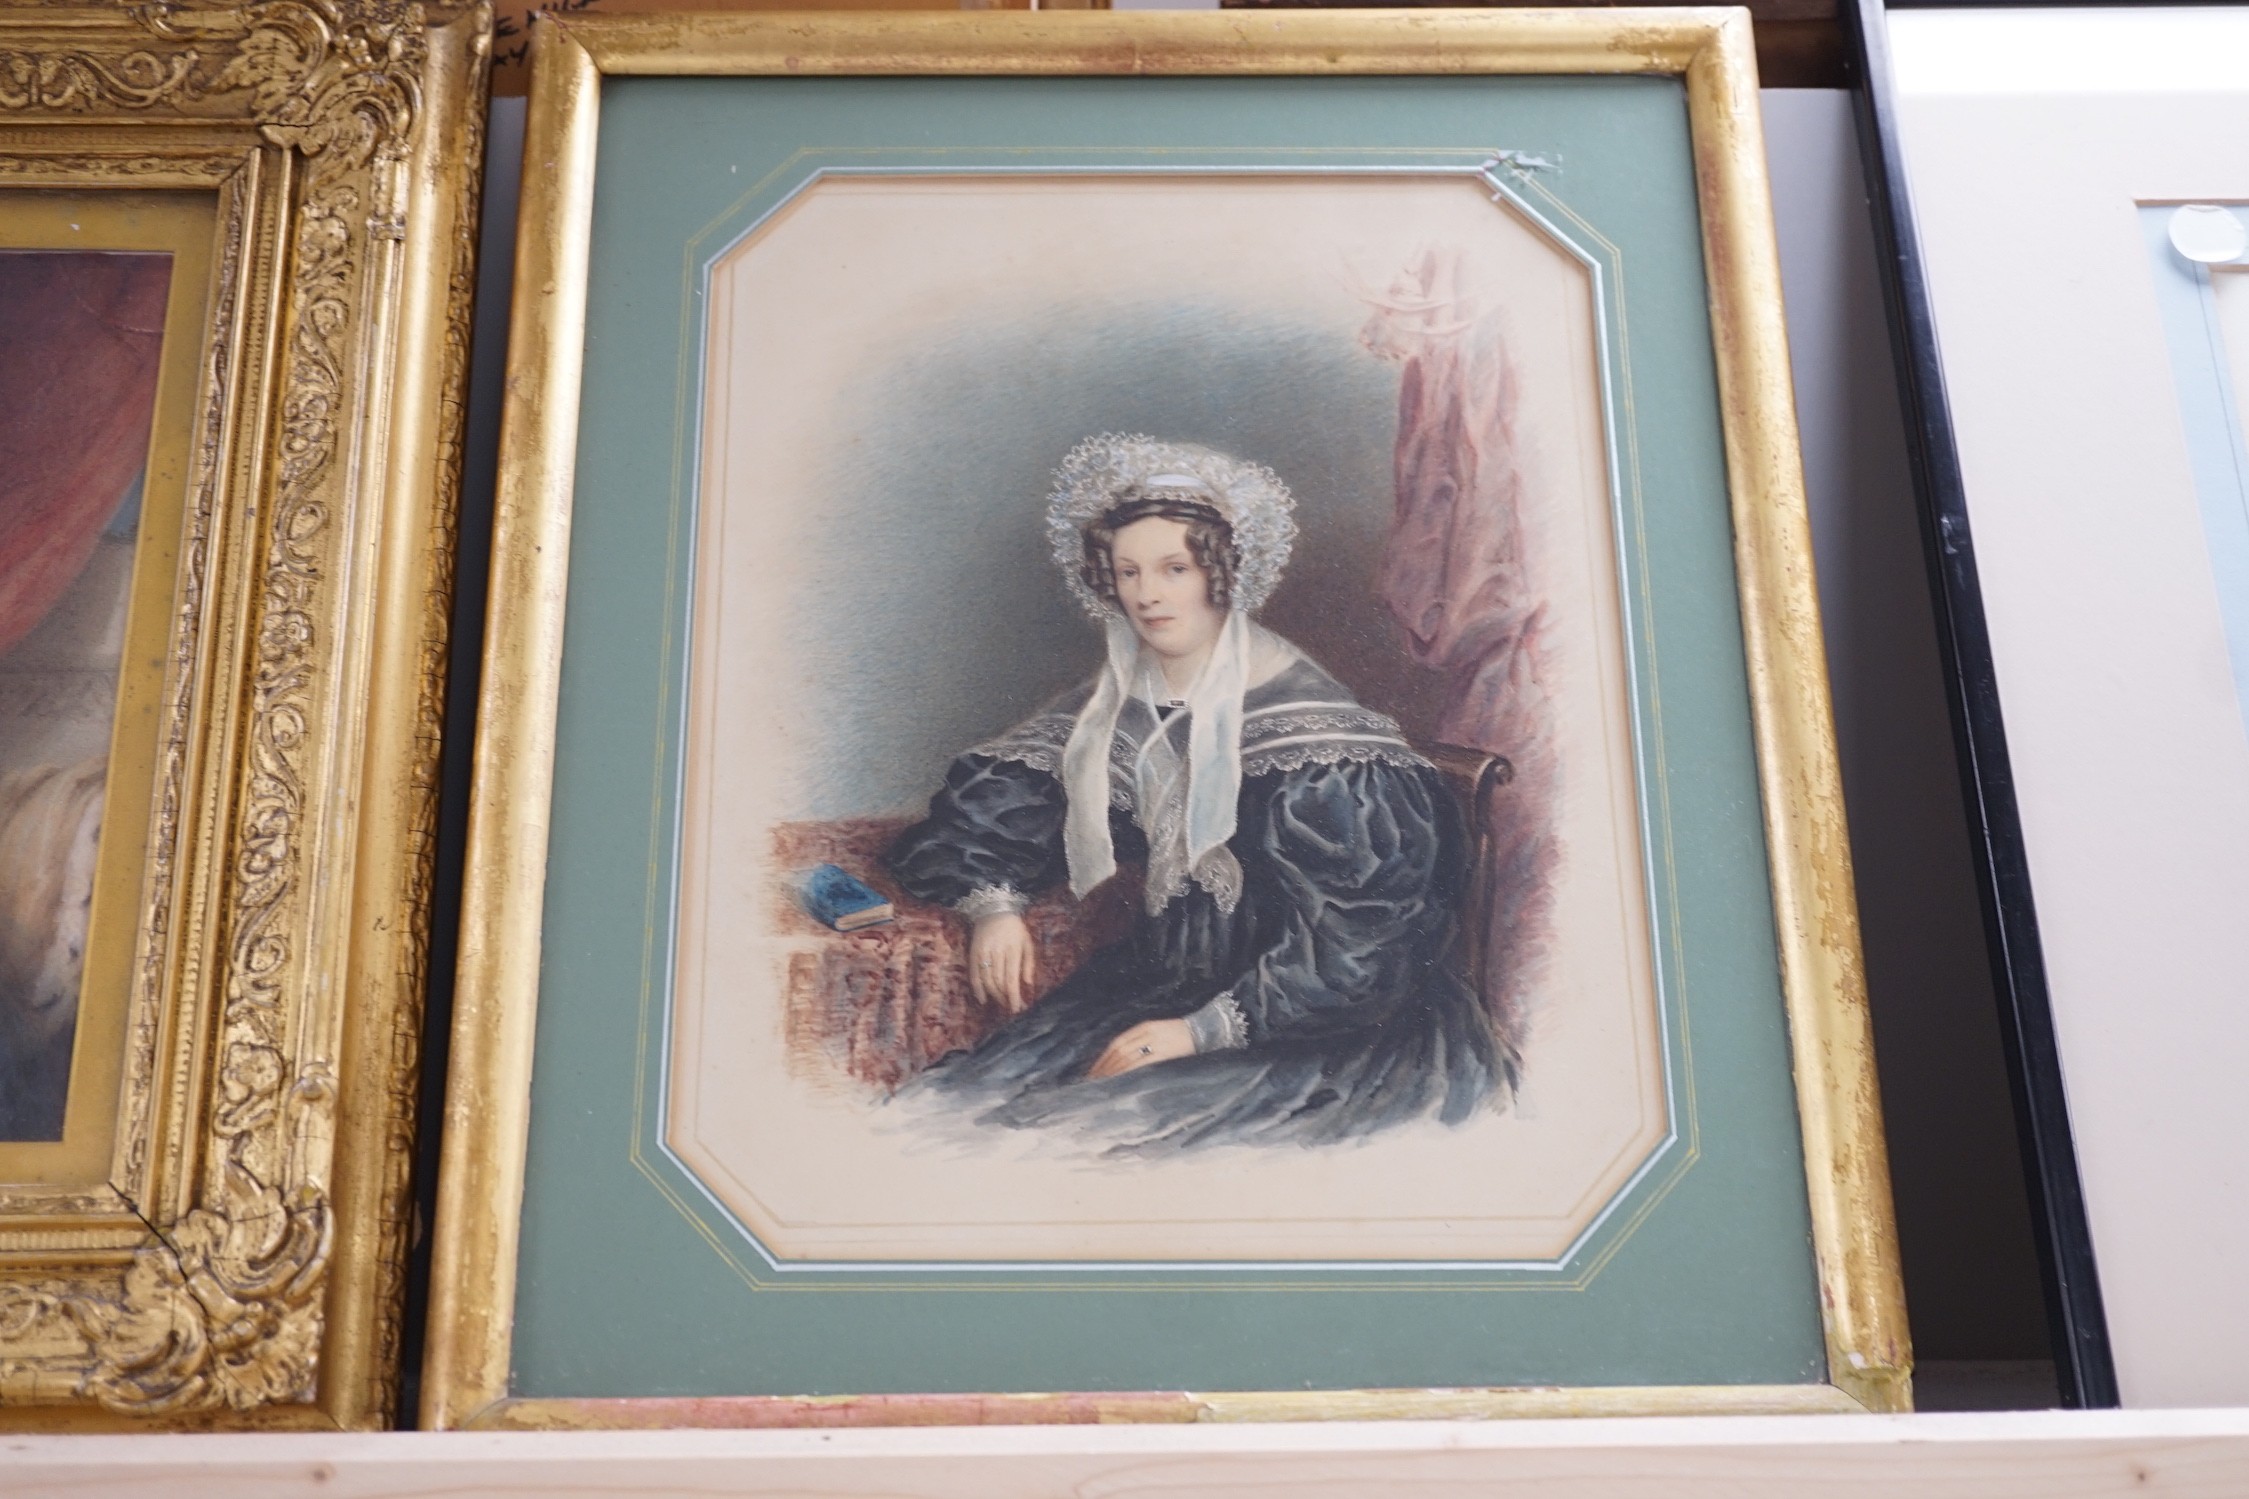 Sir William John Newton (1785-1869), watercolour, Portrait of a lady with a lap dog, 22 x 17cm, - Image 3 of 3